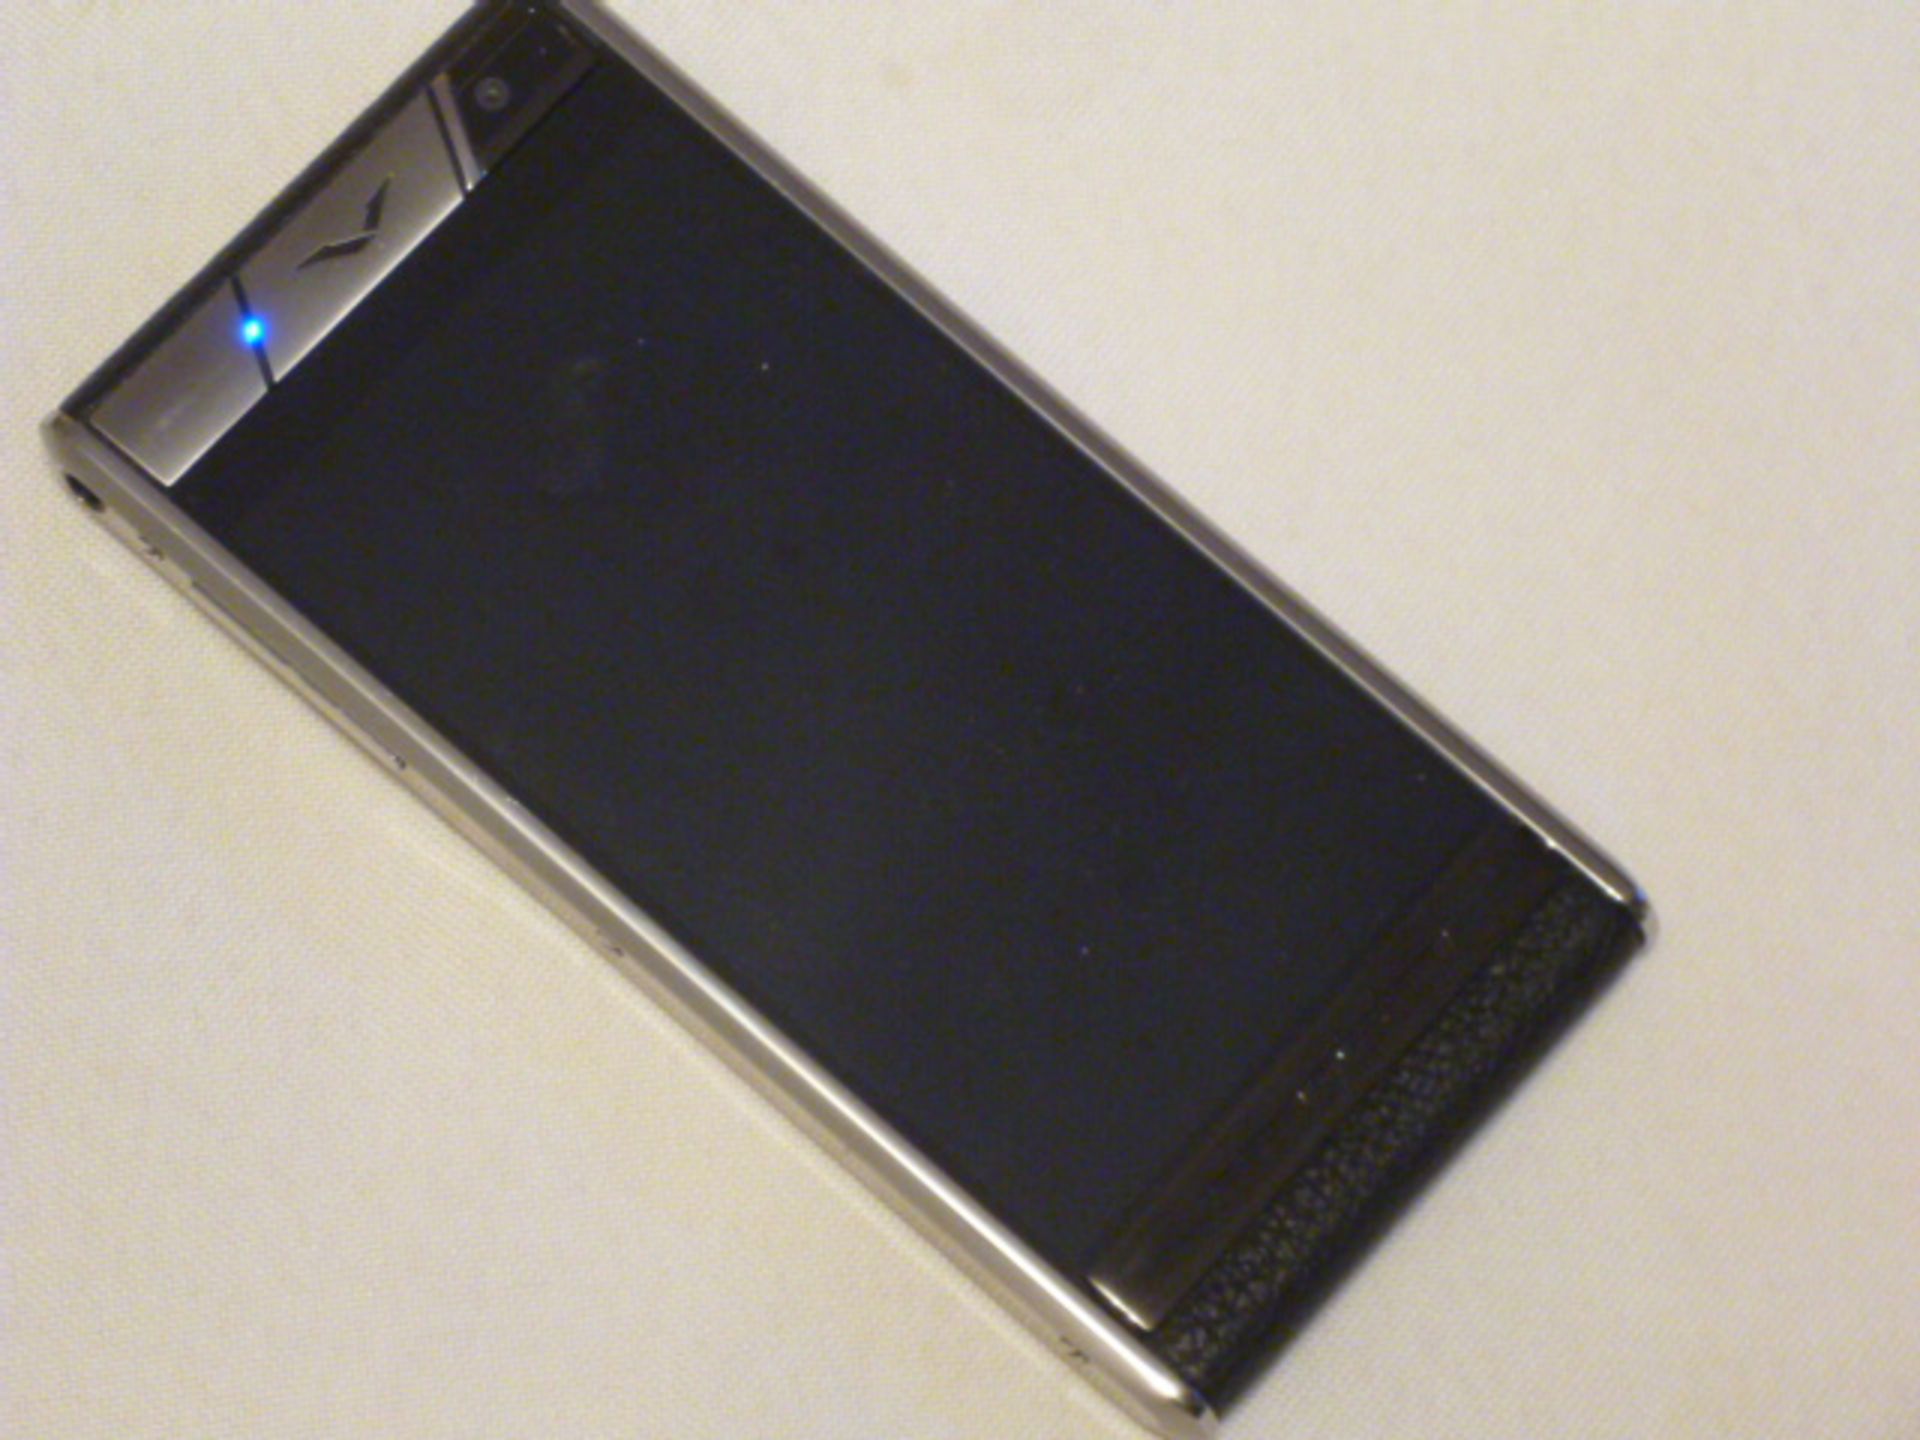 Vertu Aster Touch Phone, Black Leather. Demonstrator, S/N I-010069. Tested Working, but without